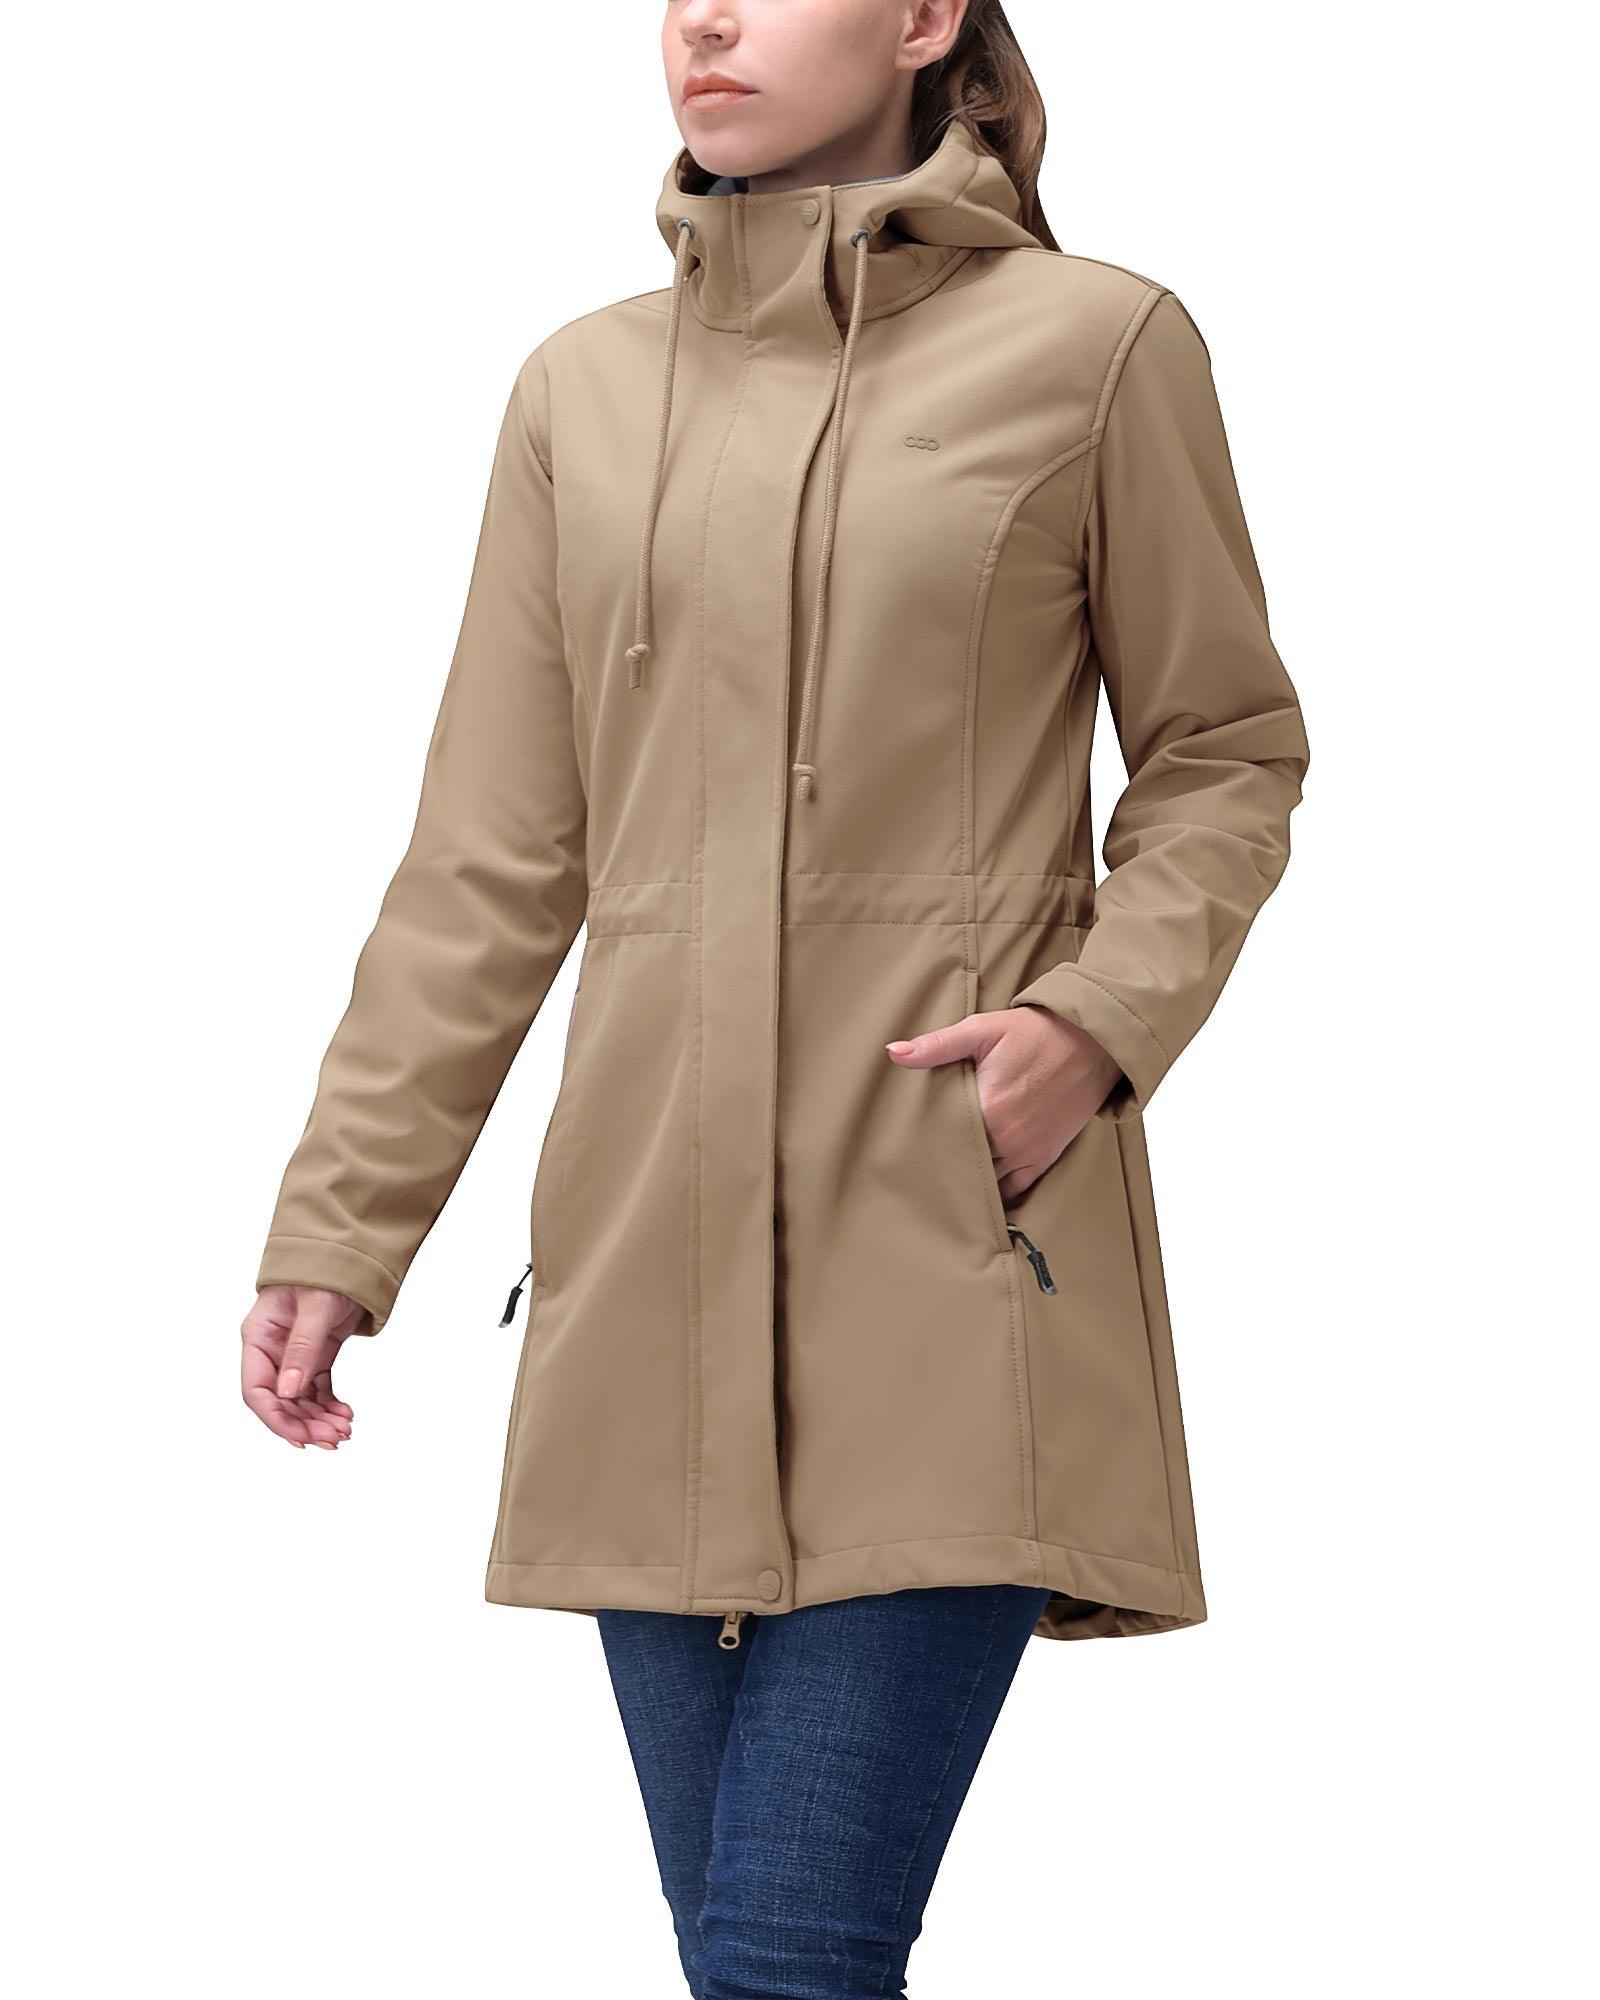 Women's Softshell Long Jacket with Hood Fleece Lined: 8000mm W/P index –  33,000ft